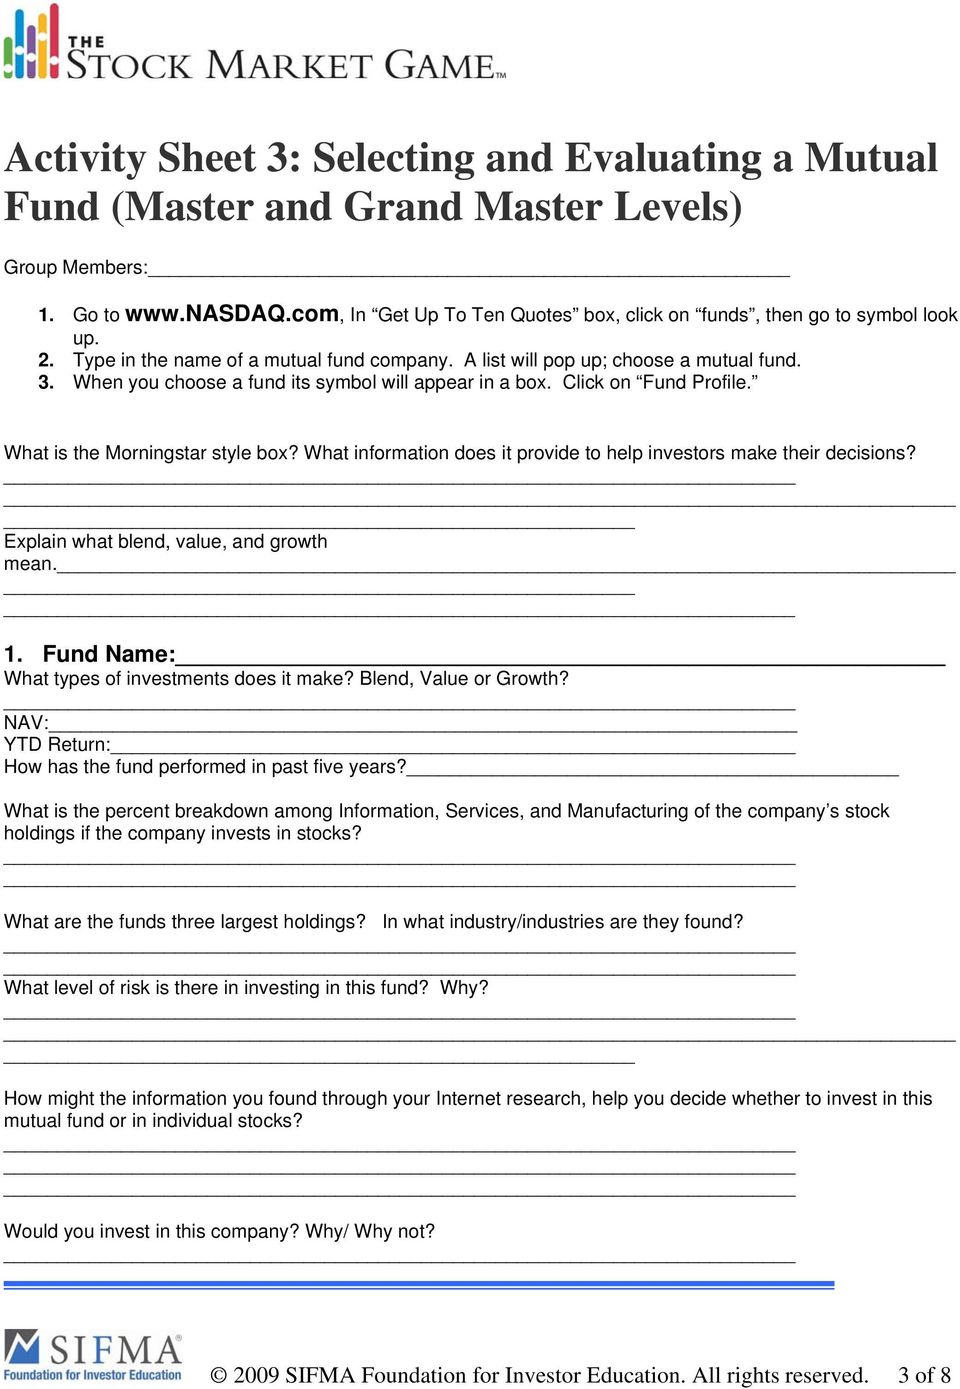 Activity Sheet 3 Selecting And Evaluating A Mutual Fund Novice And Apprentice Levels Pdf Free Download